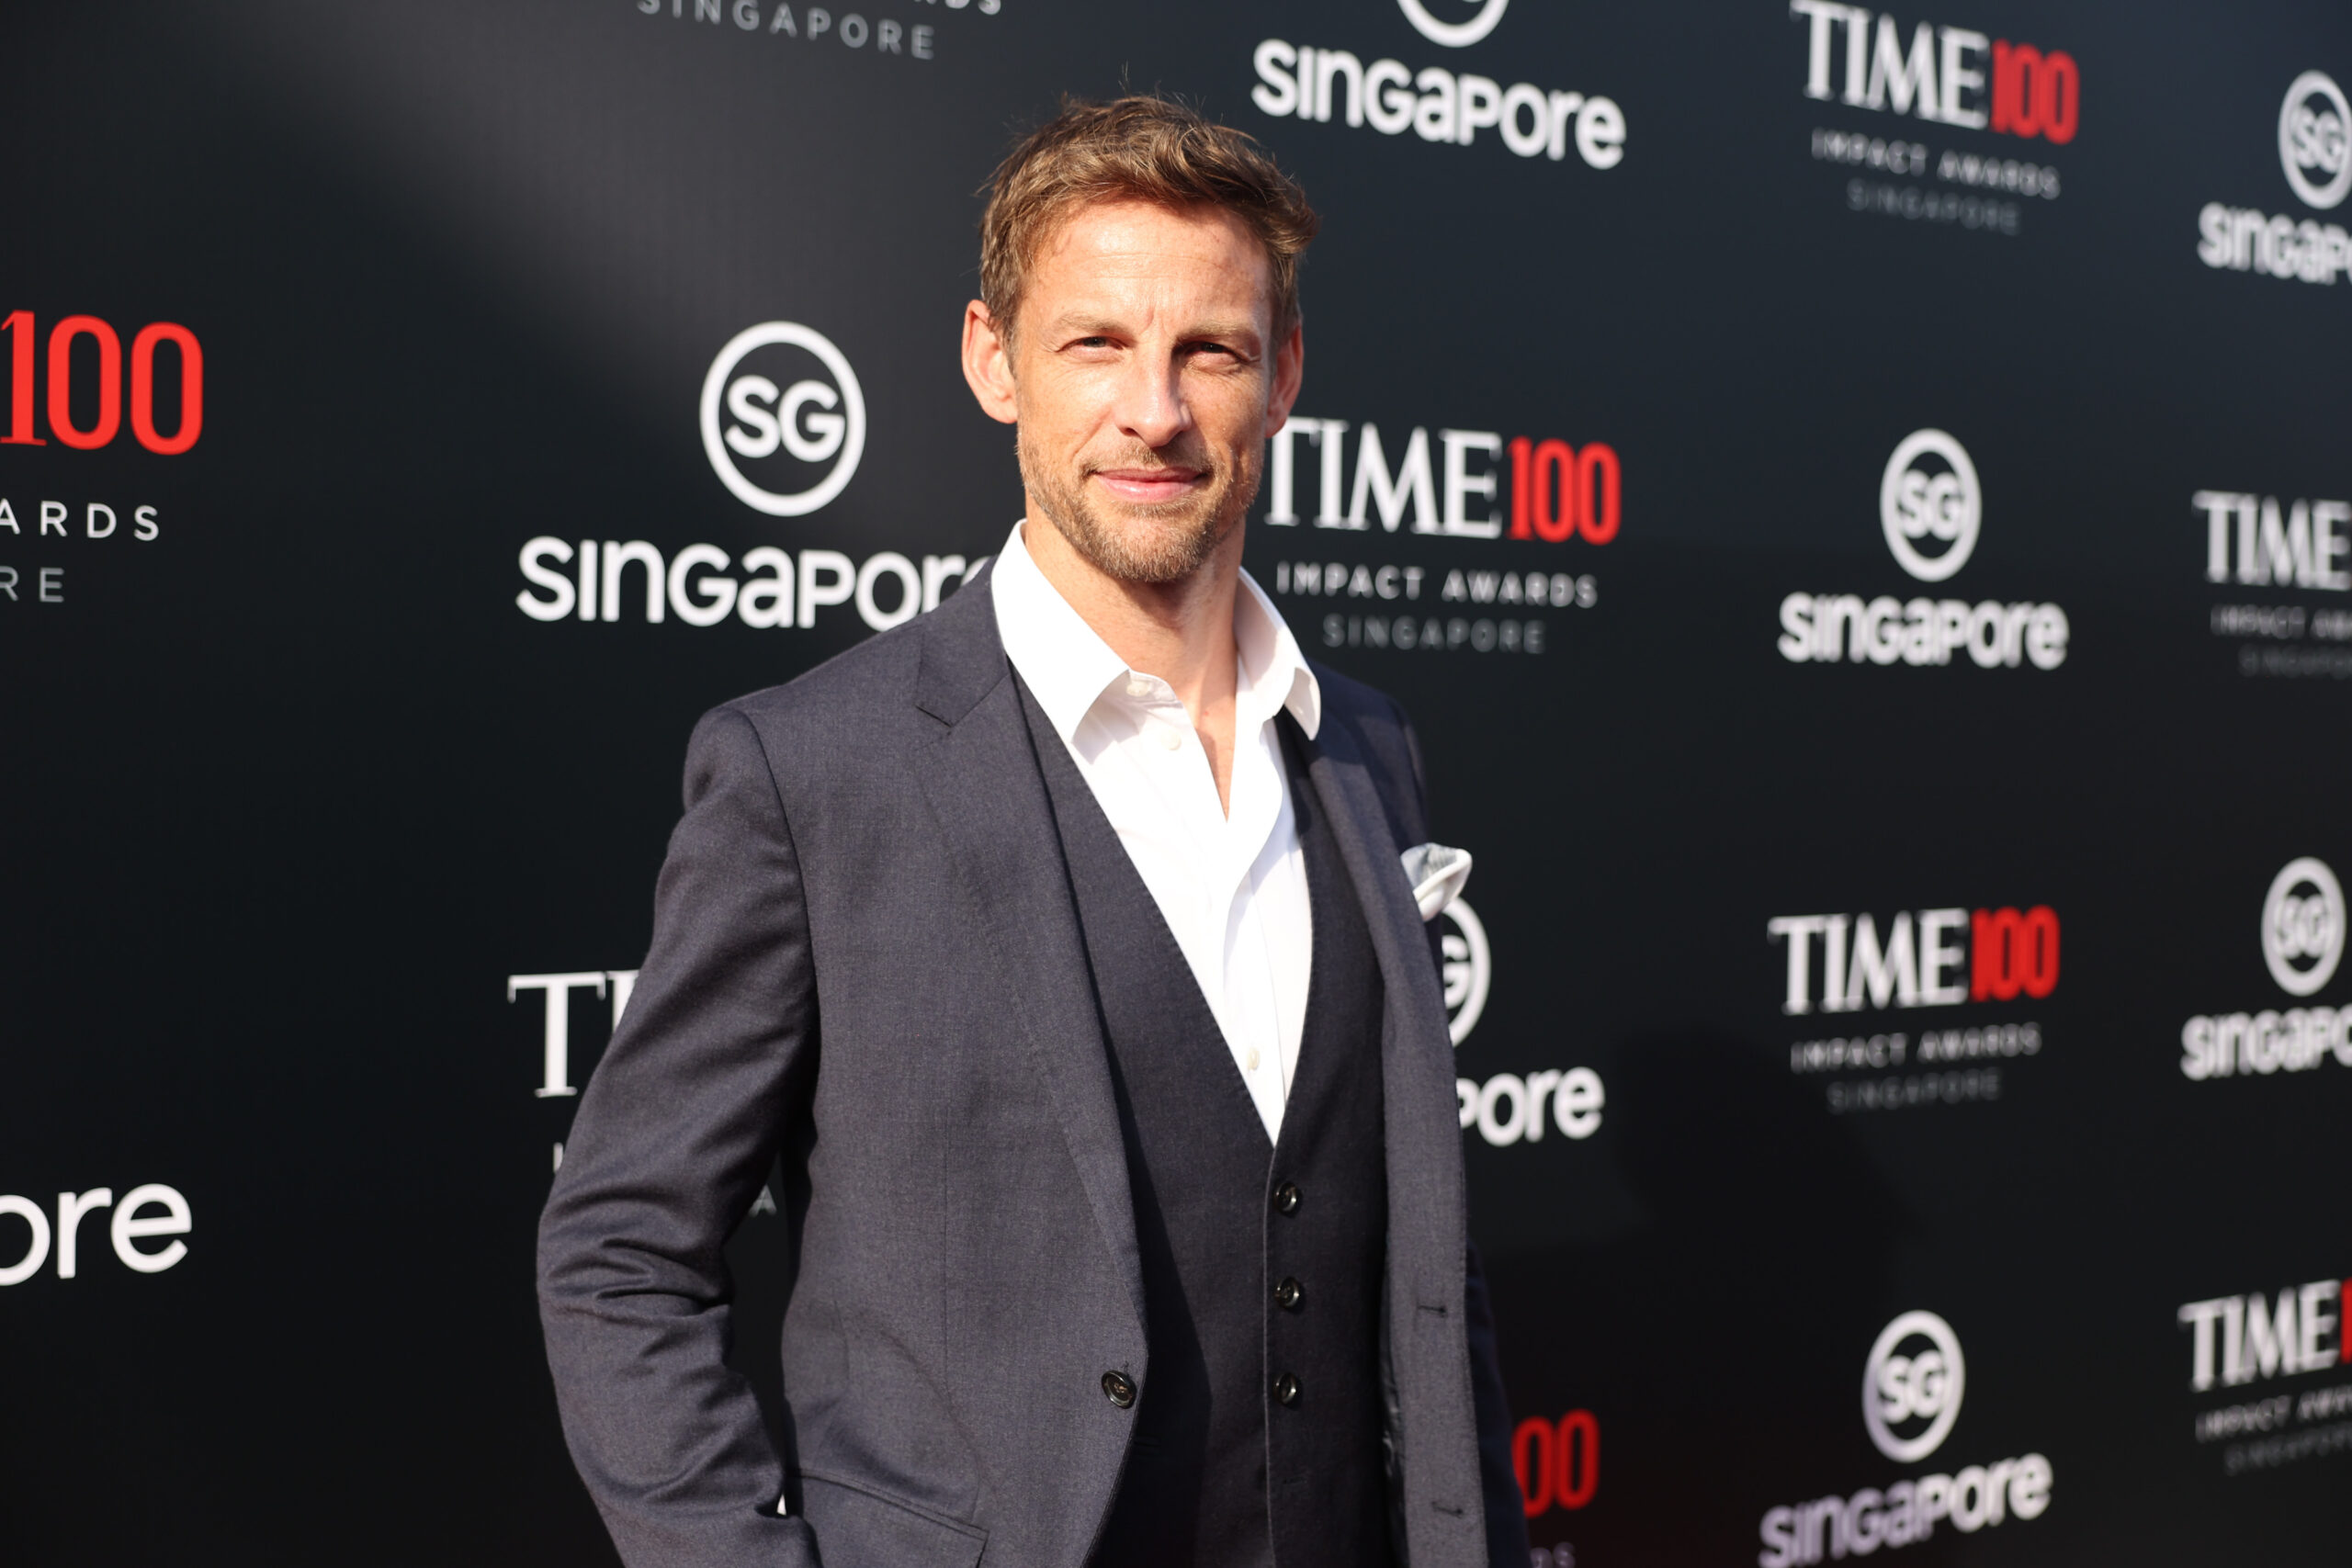 pilot-jenson-button-asks-for-$2.3-million-for-a-vacation-home-in-palm-springs